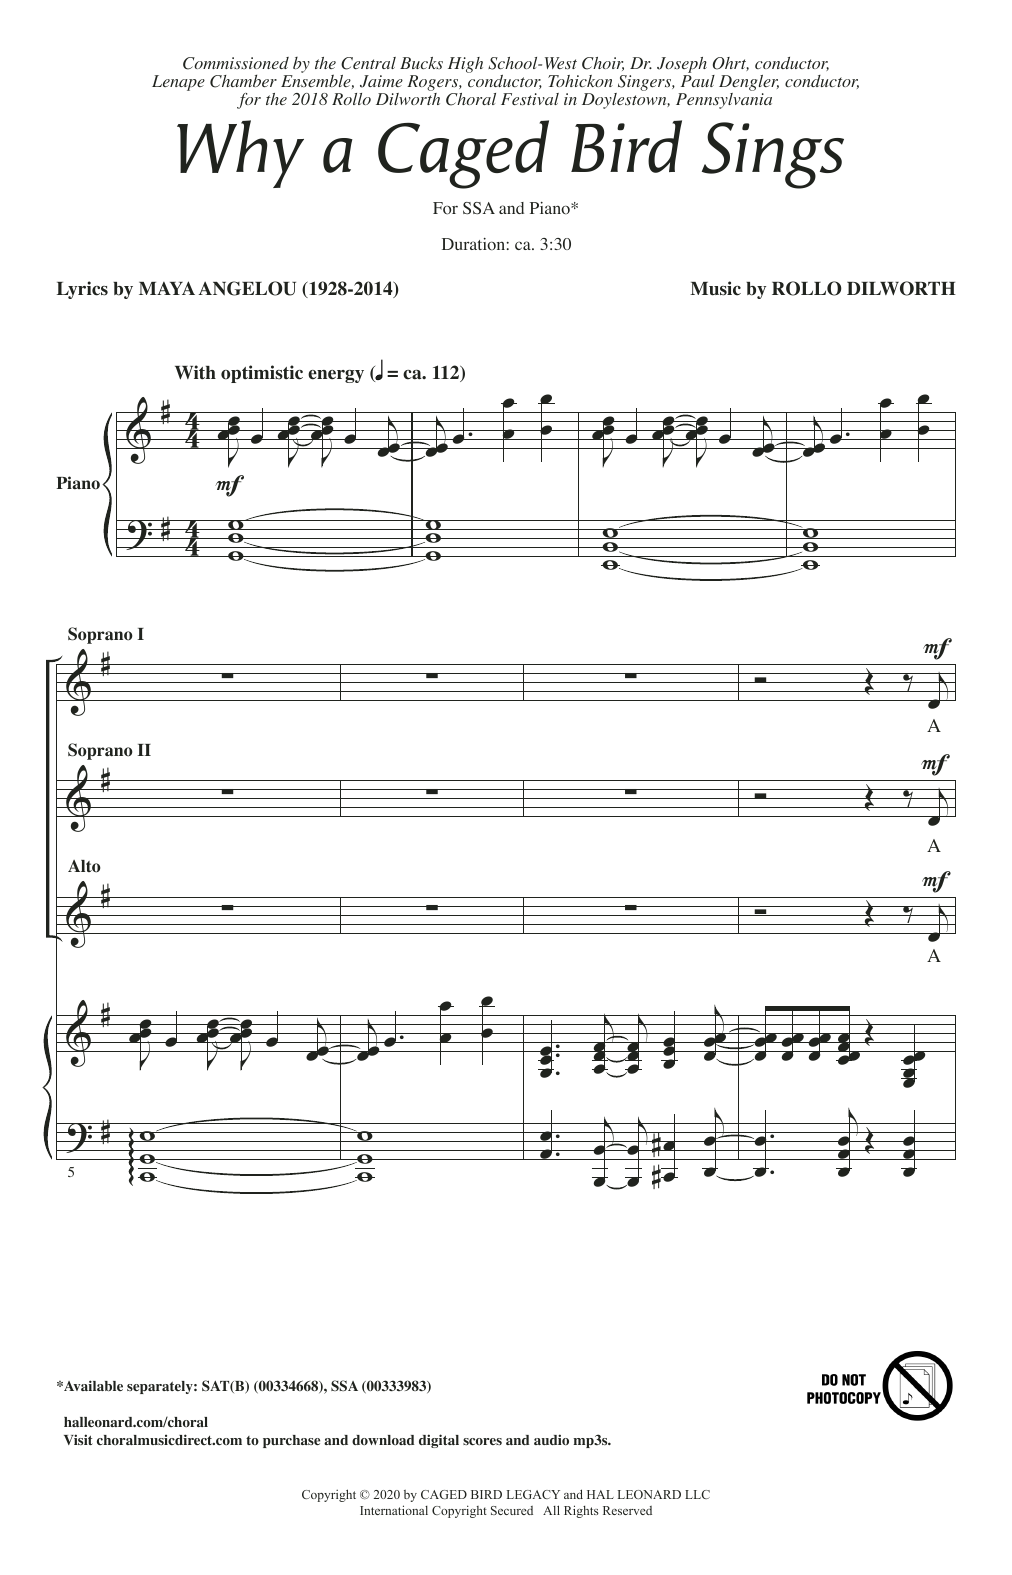 Download Maya Angelou and Rollo Dilworth Why A Caged Bird Sings Sheet Music